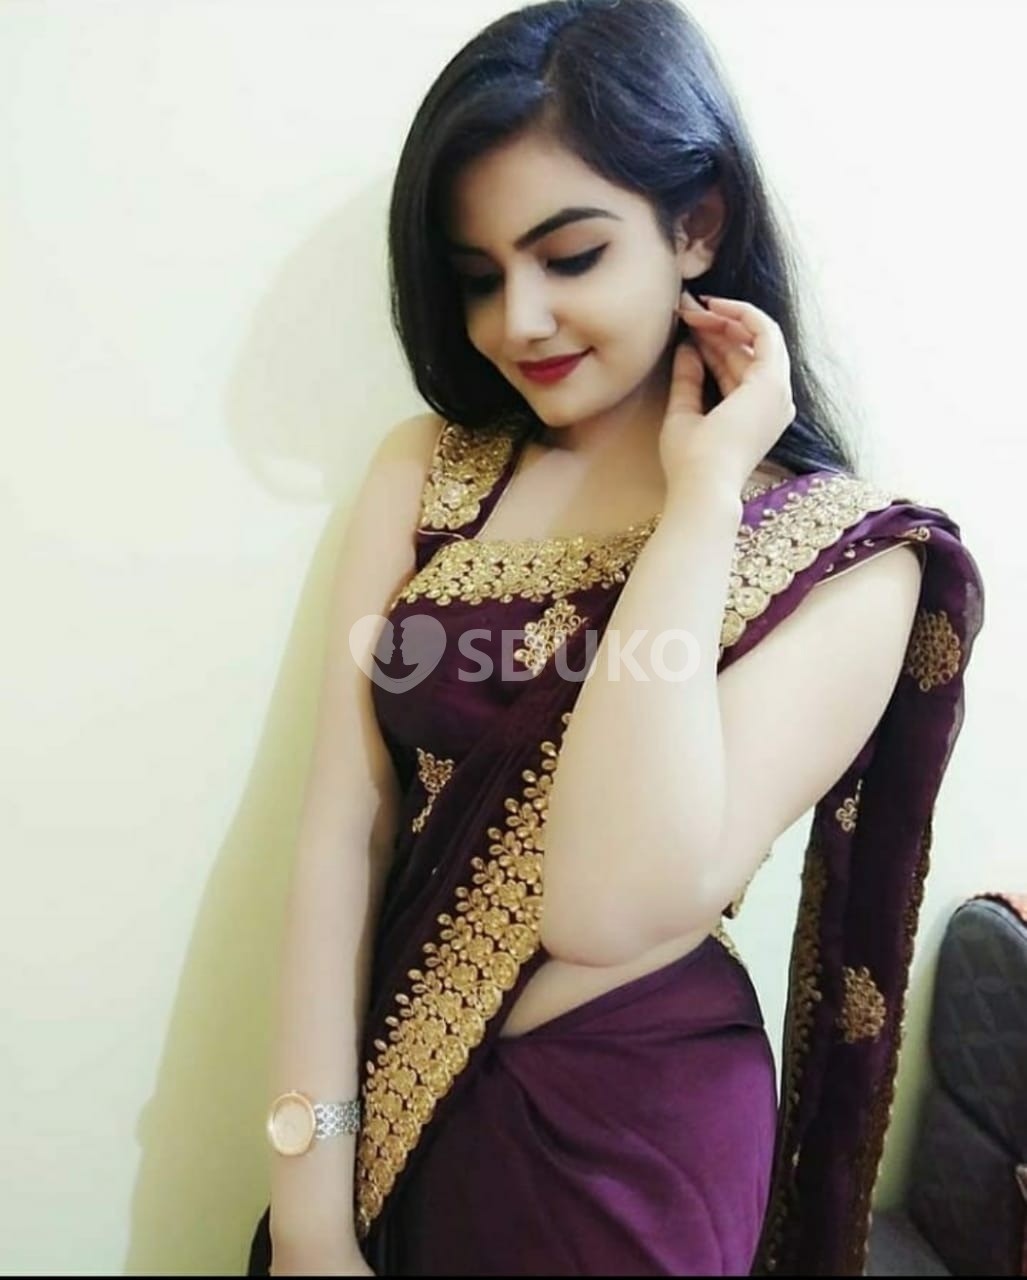 Velachery ☎️ VIP LOW RATE (Kavya) ESCORT FULL HARD FUCK WITH NAUGHTY IF YOU WANT TO FUCK MY PUSSY WITH BIG BOOBS GIR